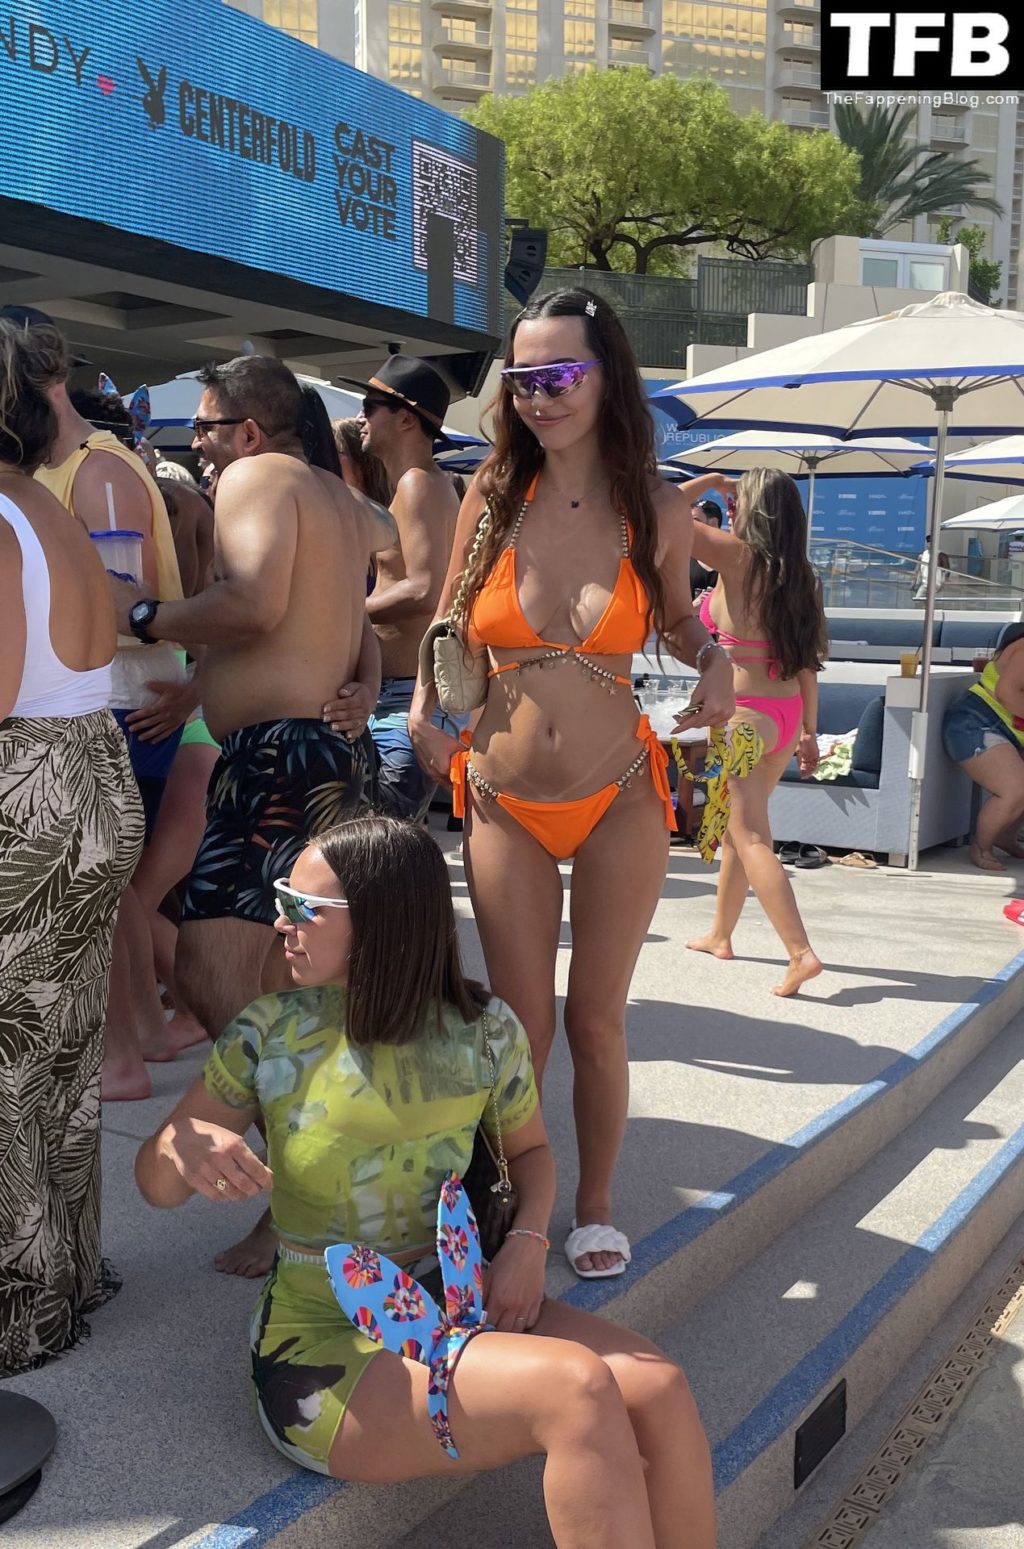 Iva Kovacevic Shows Off Her Curves in a Bikini at Wet Republic in Las Vegas (38 Photos)